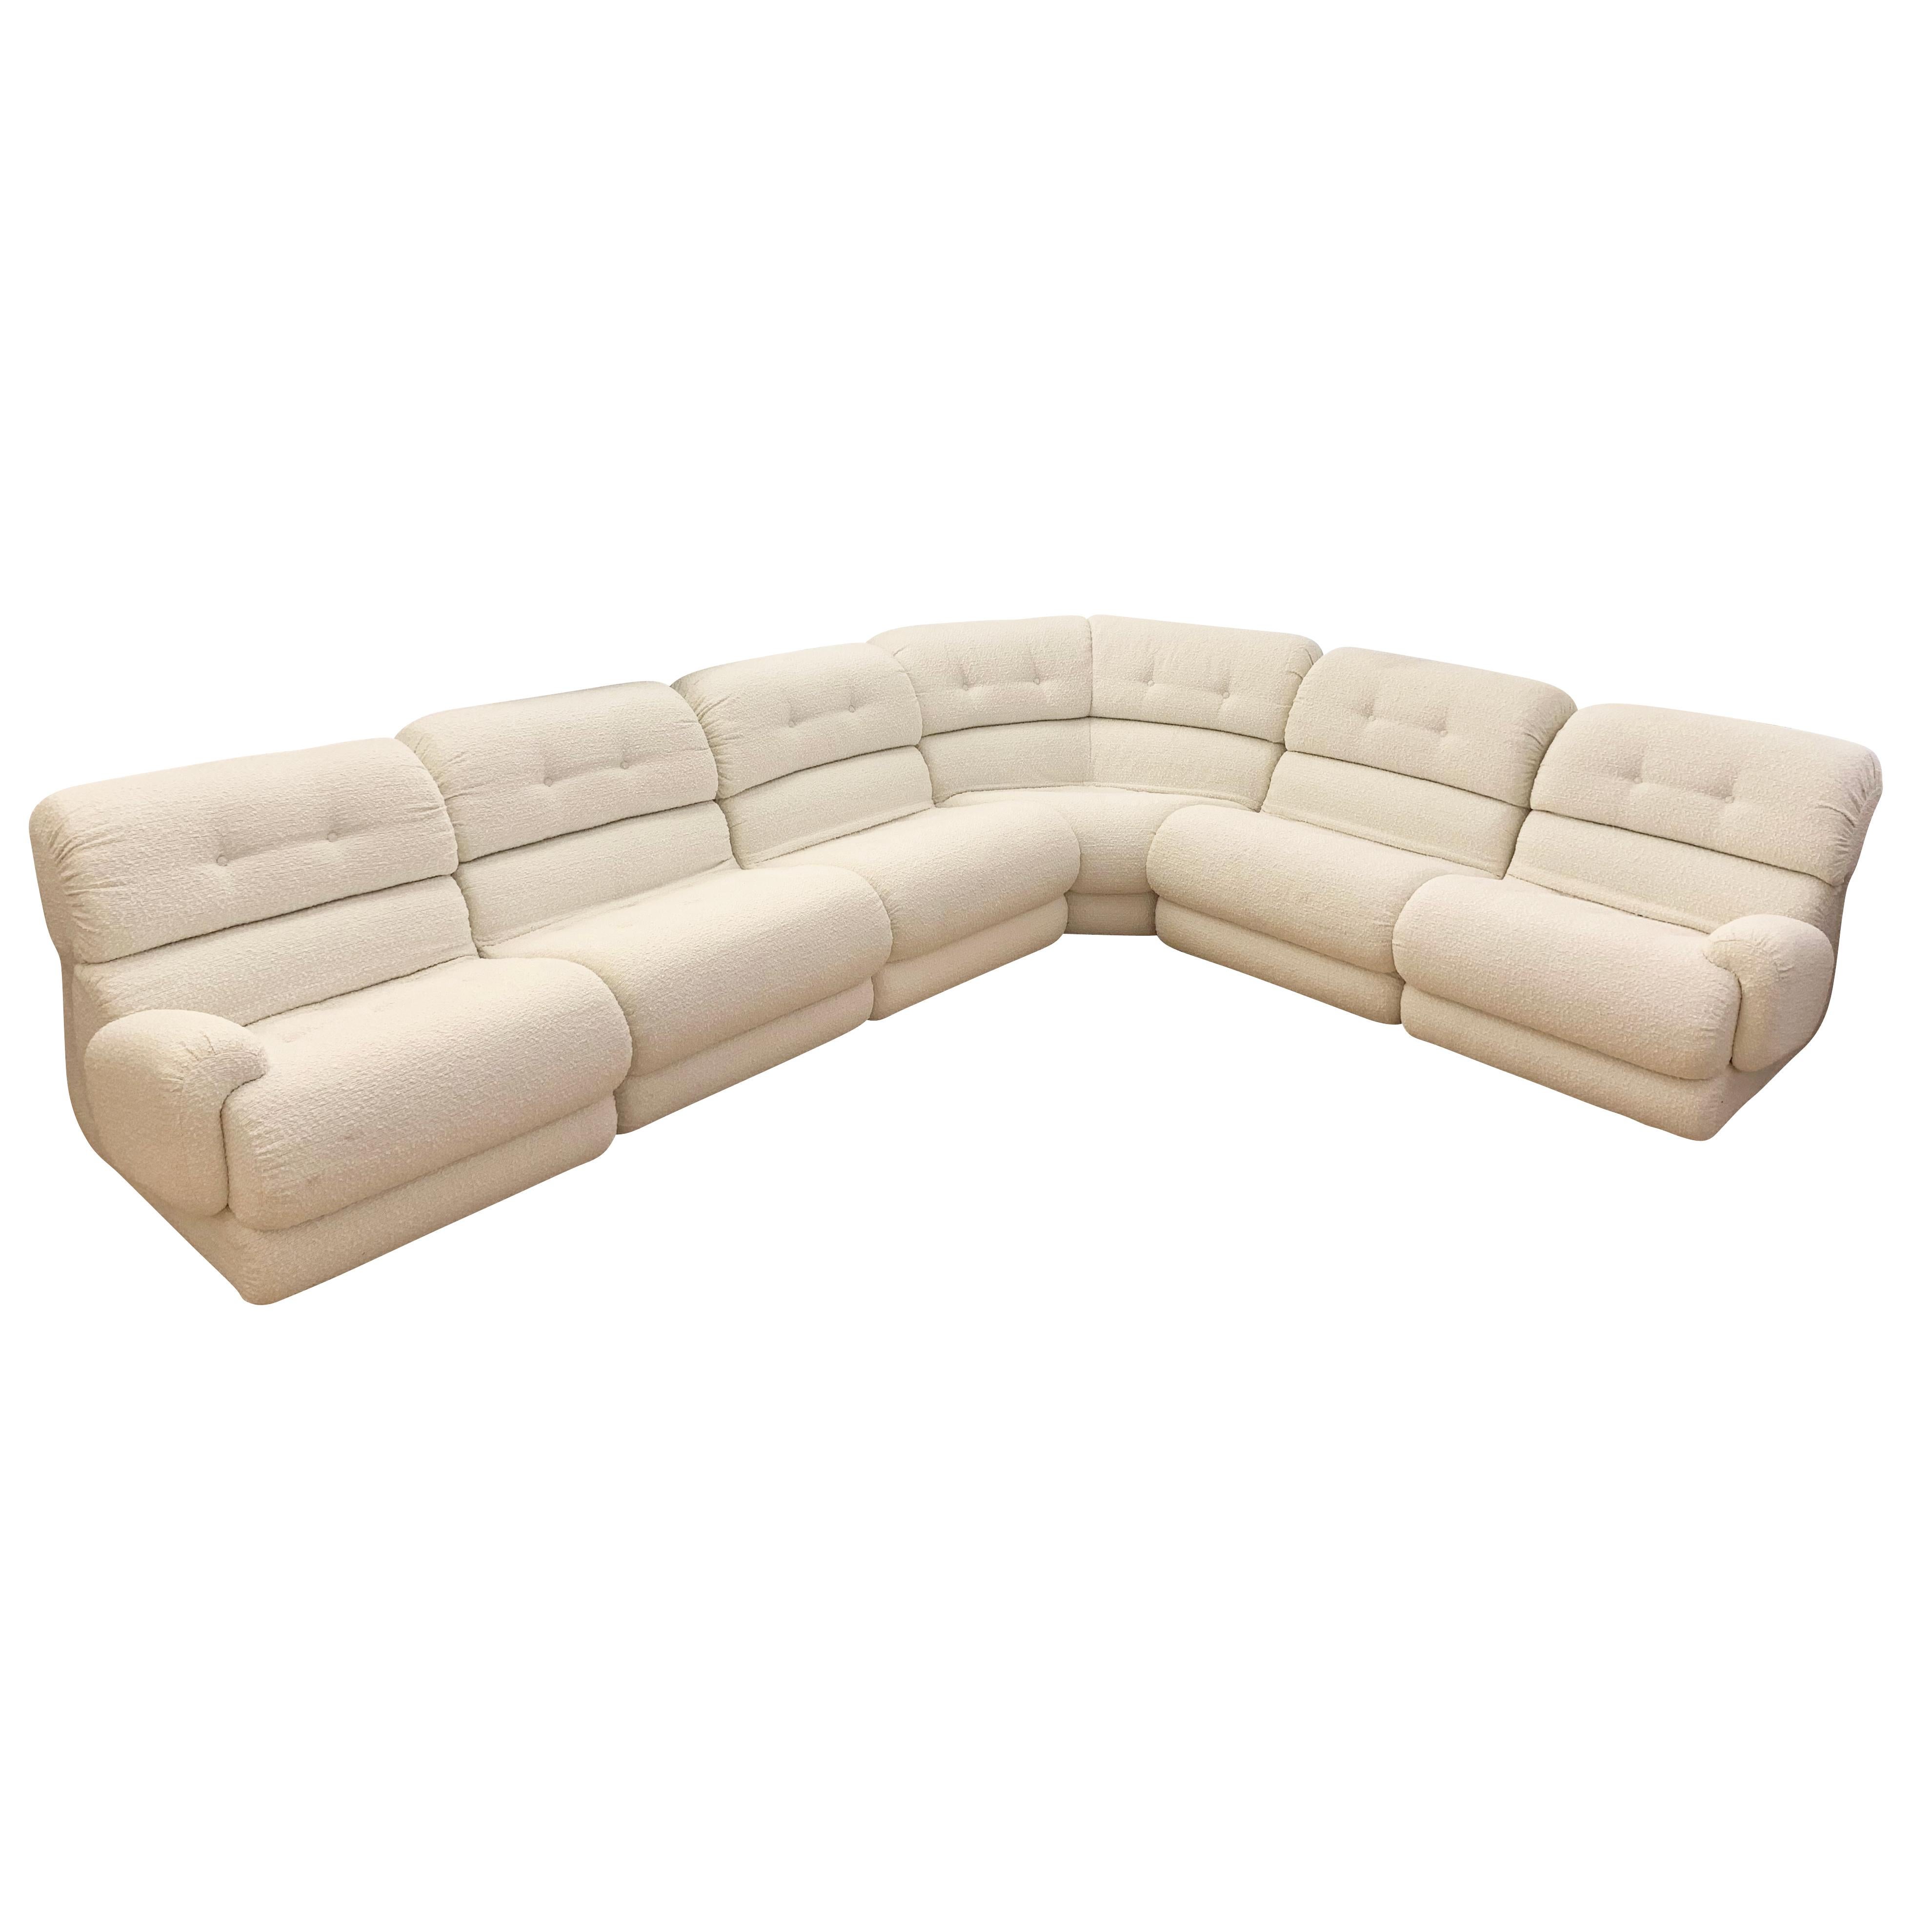 Italian Mid-Century sectional recovered in an off-white boucle fabric. Each piece can be easily separated for individual use or to create a variety of layouts. Composed of the following pieces.

1 angular section: 57W x 36D x 32H

3 sections without